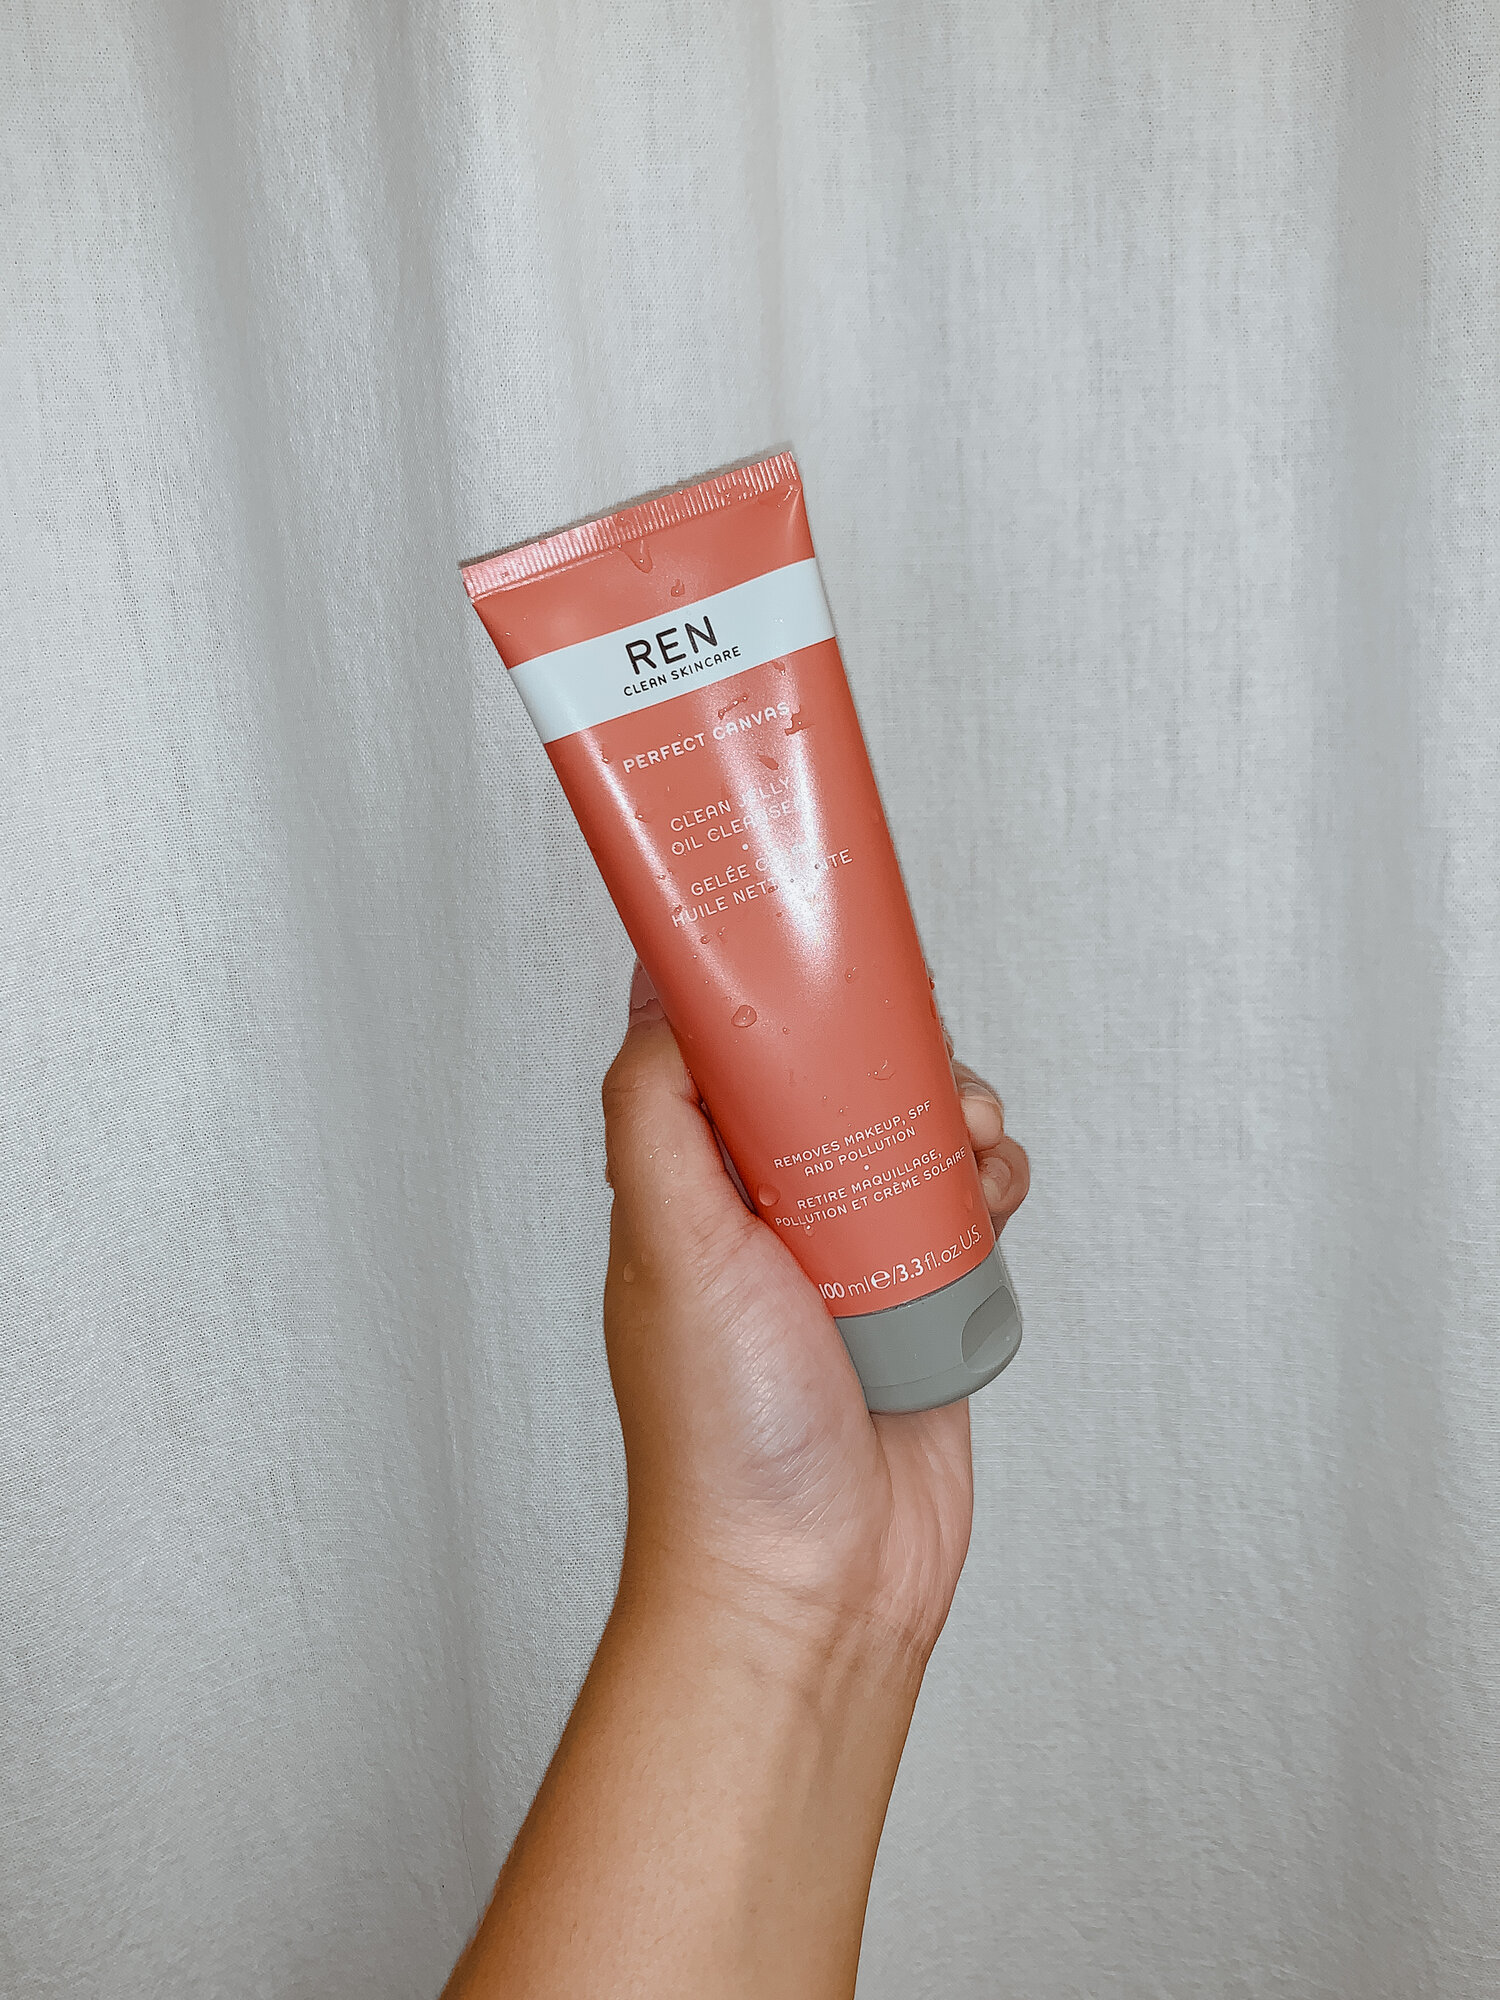 hulkende Meget Dental REN Perfect Canvas Clean Jelly Oil Cleanser REVIEW | Corinth Suarez -  Miami, Florida Blogger & Influencer